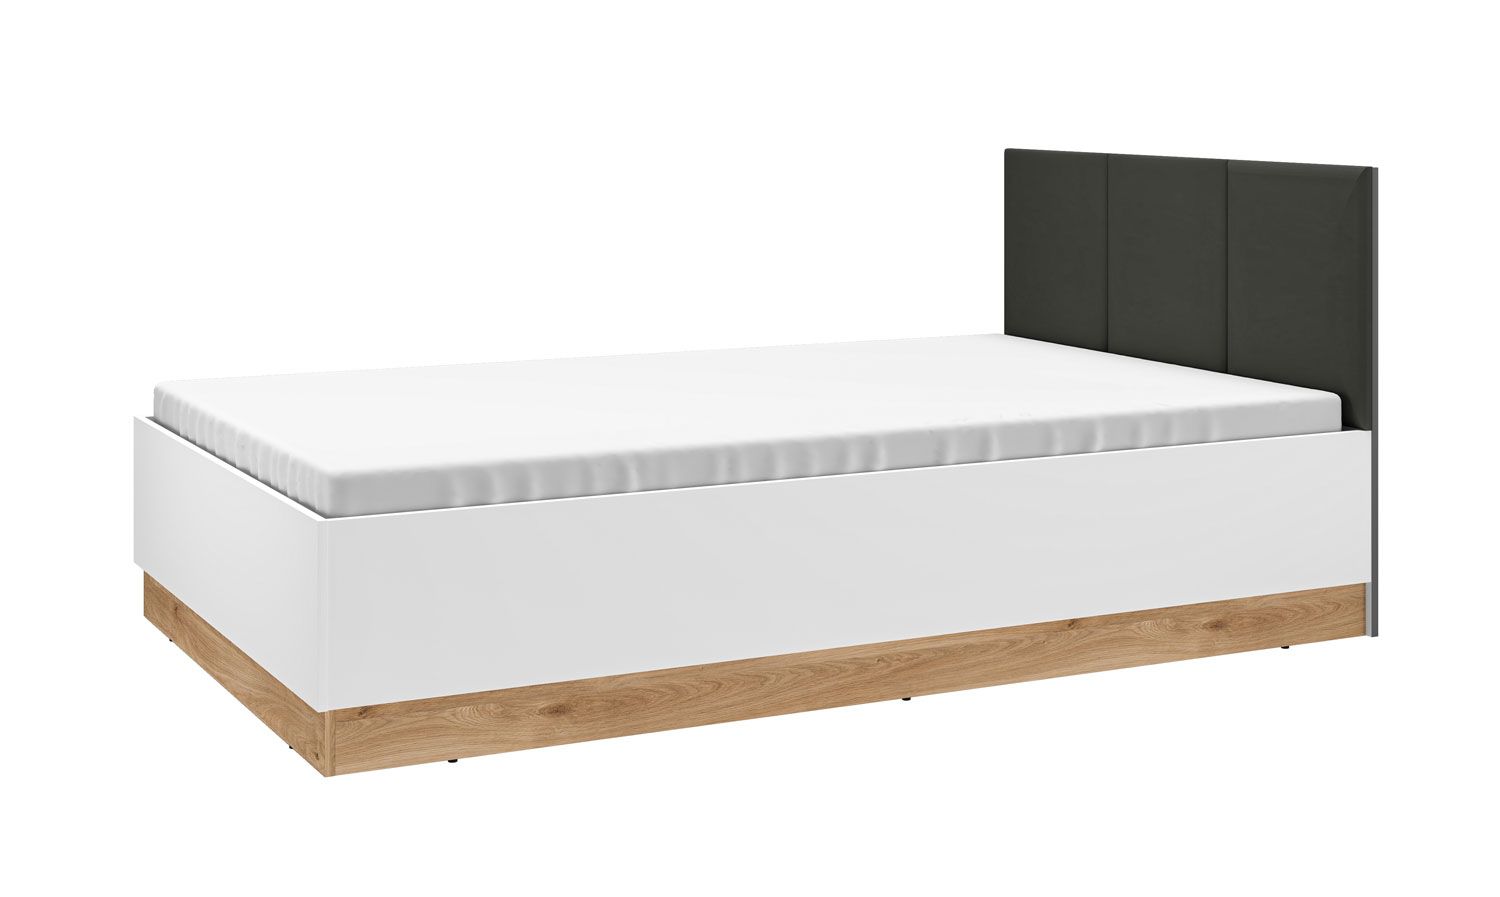 Single bed / guest bed incl. slatted frame Mackinac 13, color: white / oak / graphite matt, lying surface: 120 x 200 cm, ABS edge protection